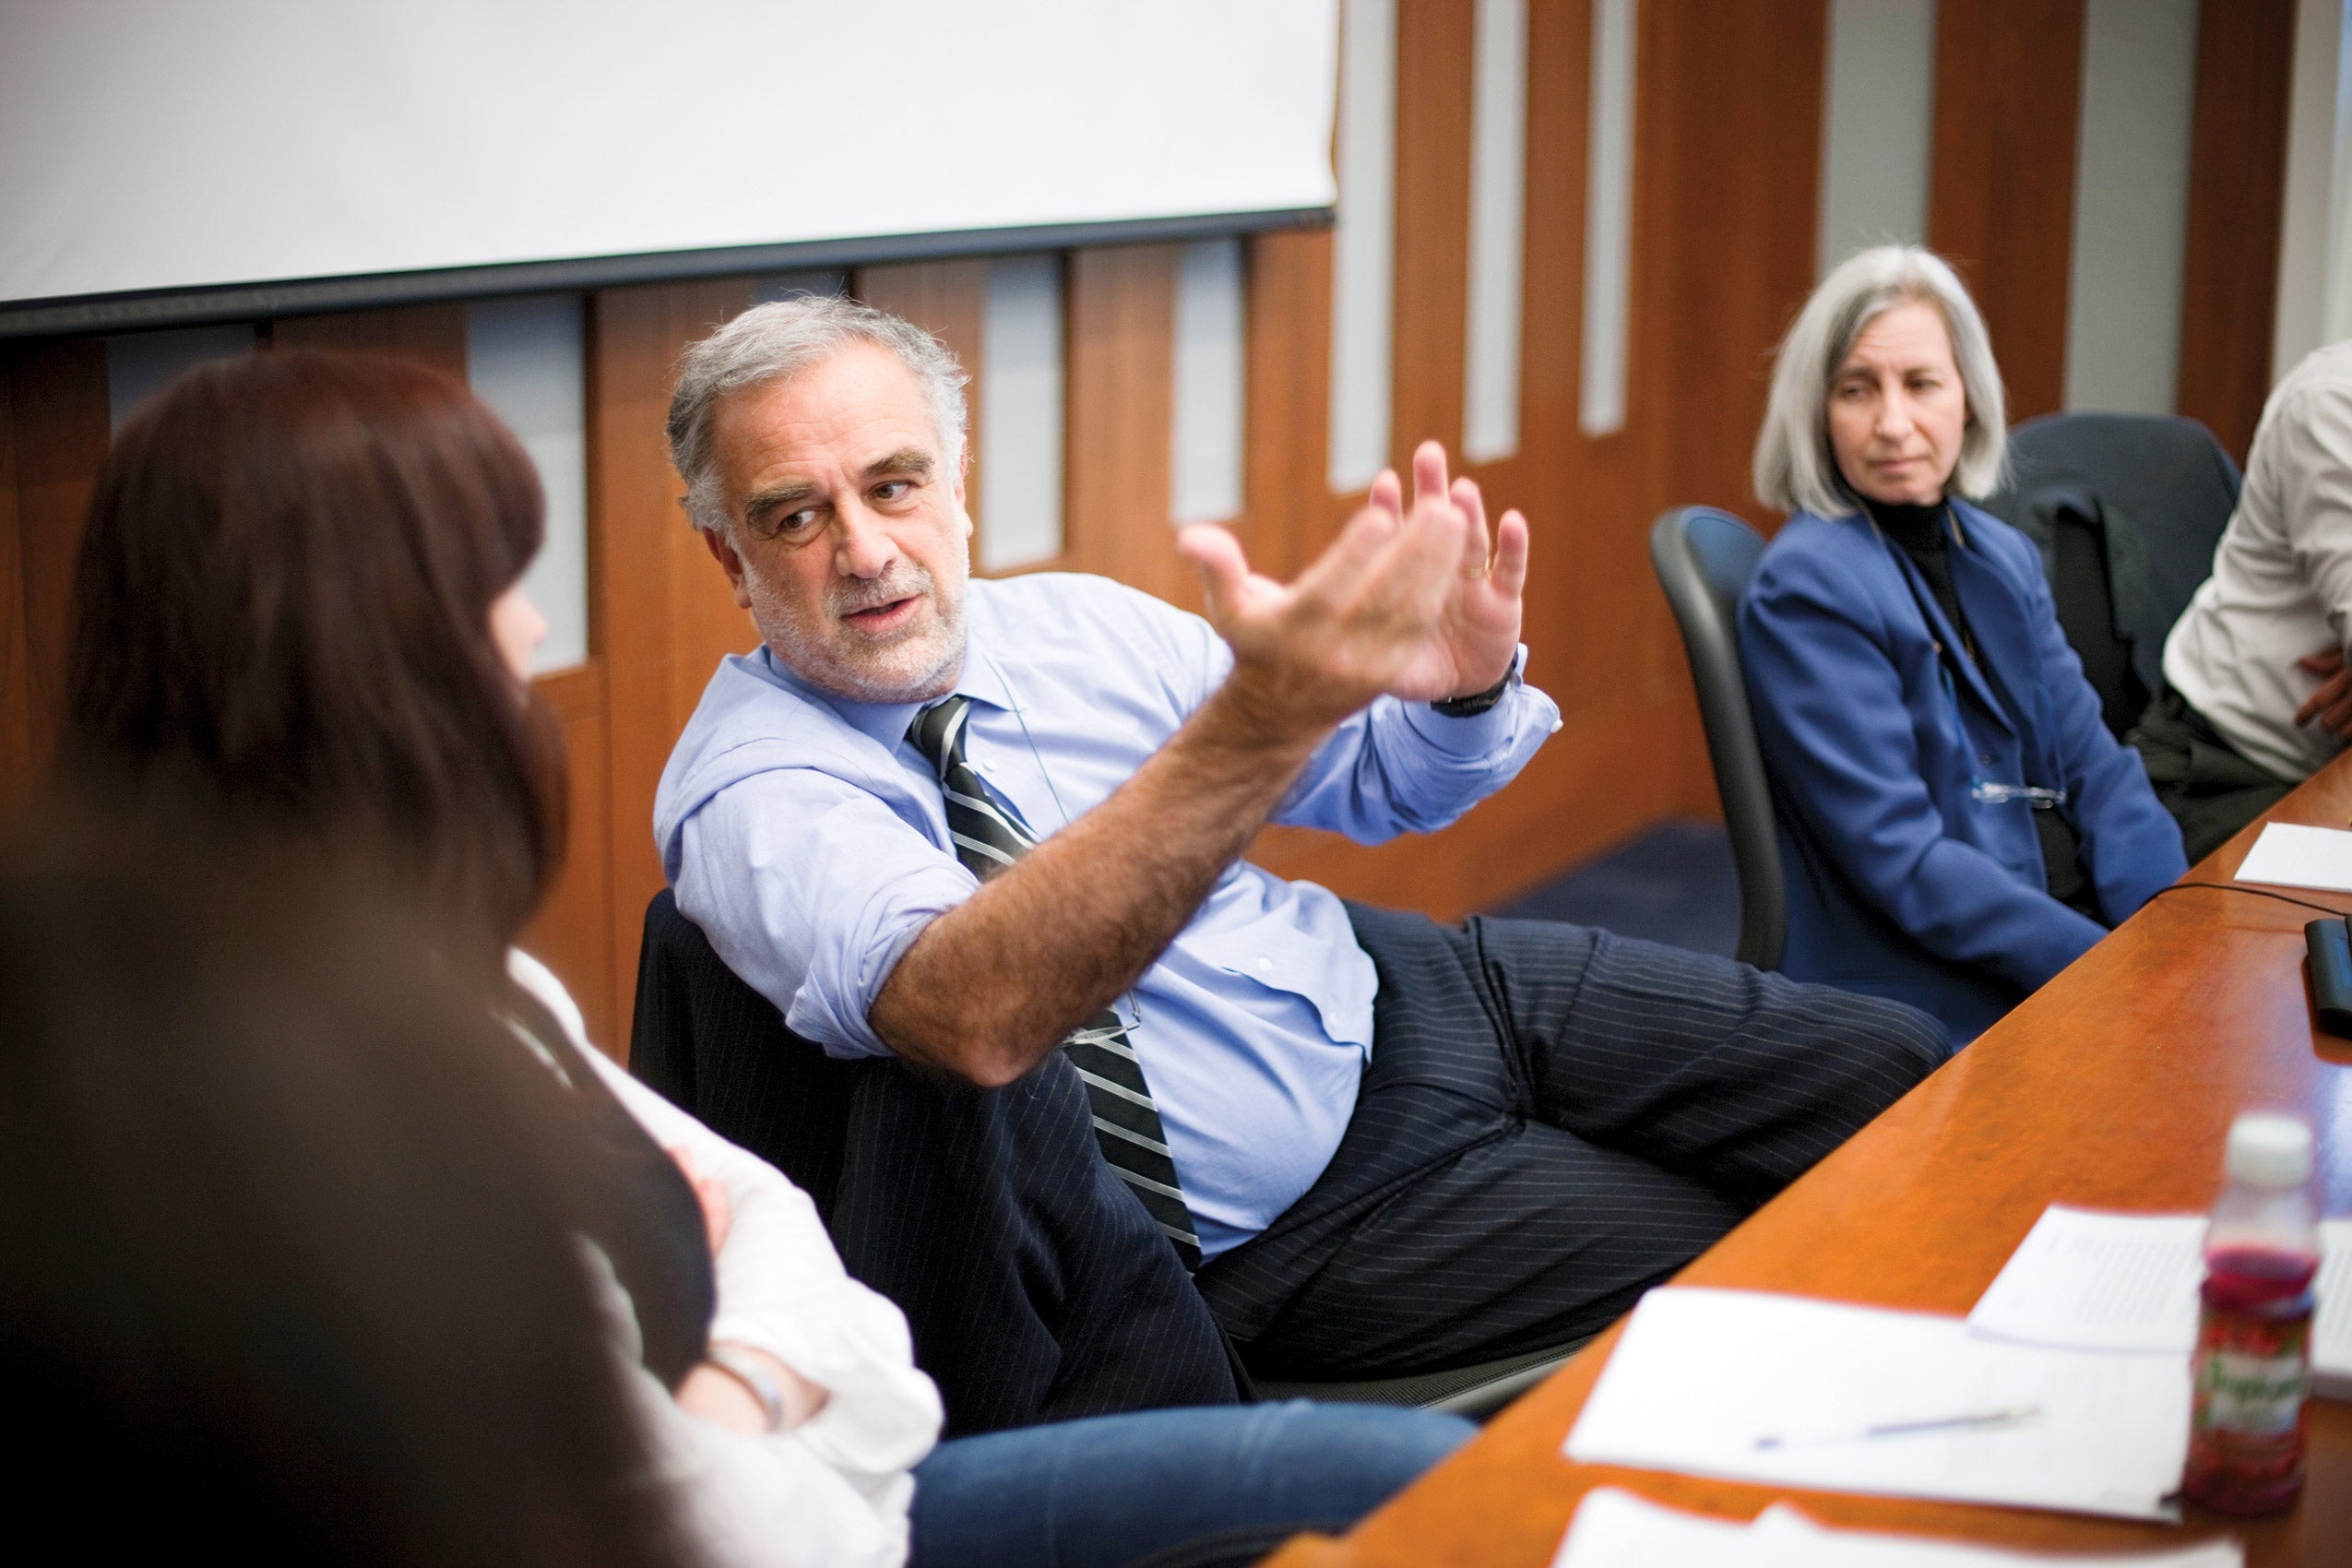 Luis Moreno-Ocampo sitting with colleagues and gesturing animatedly